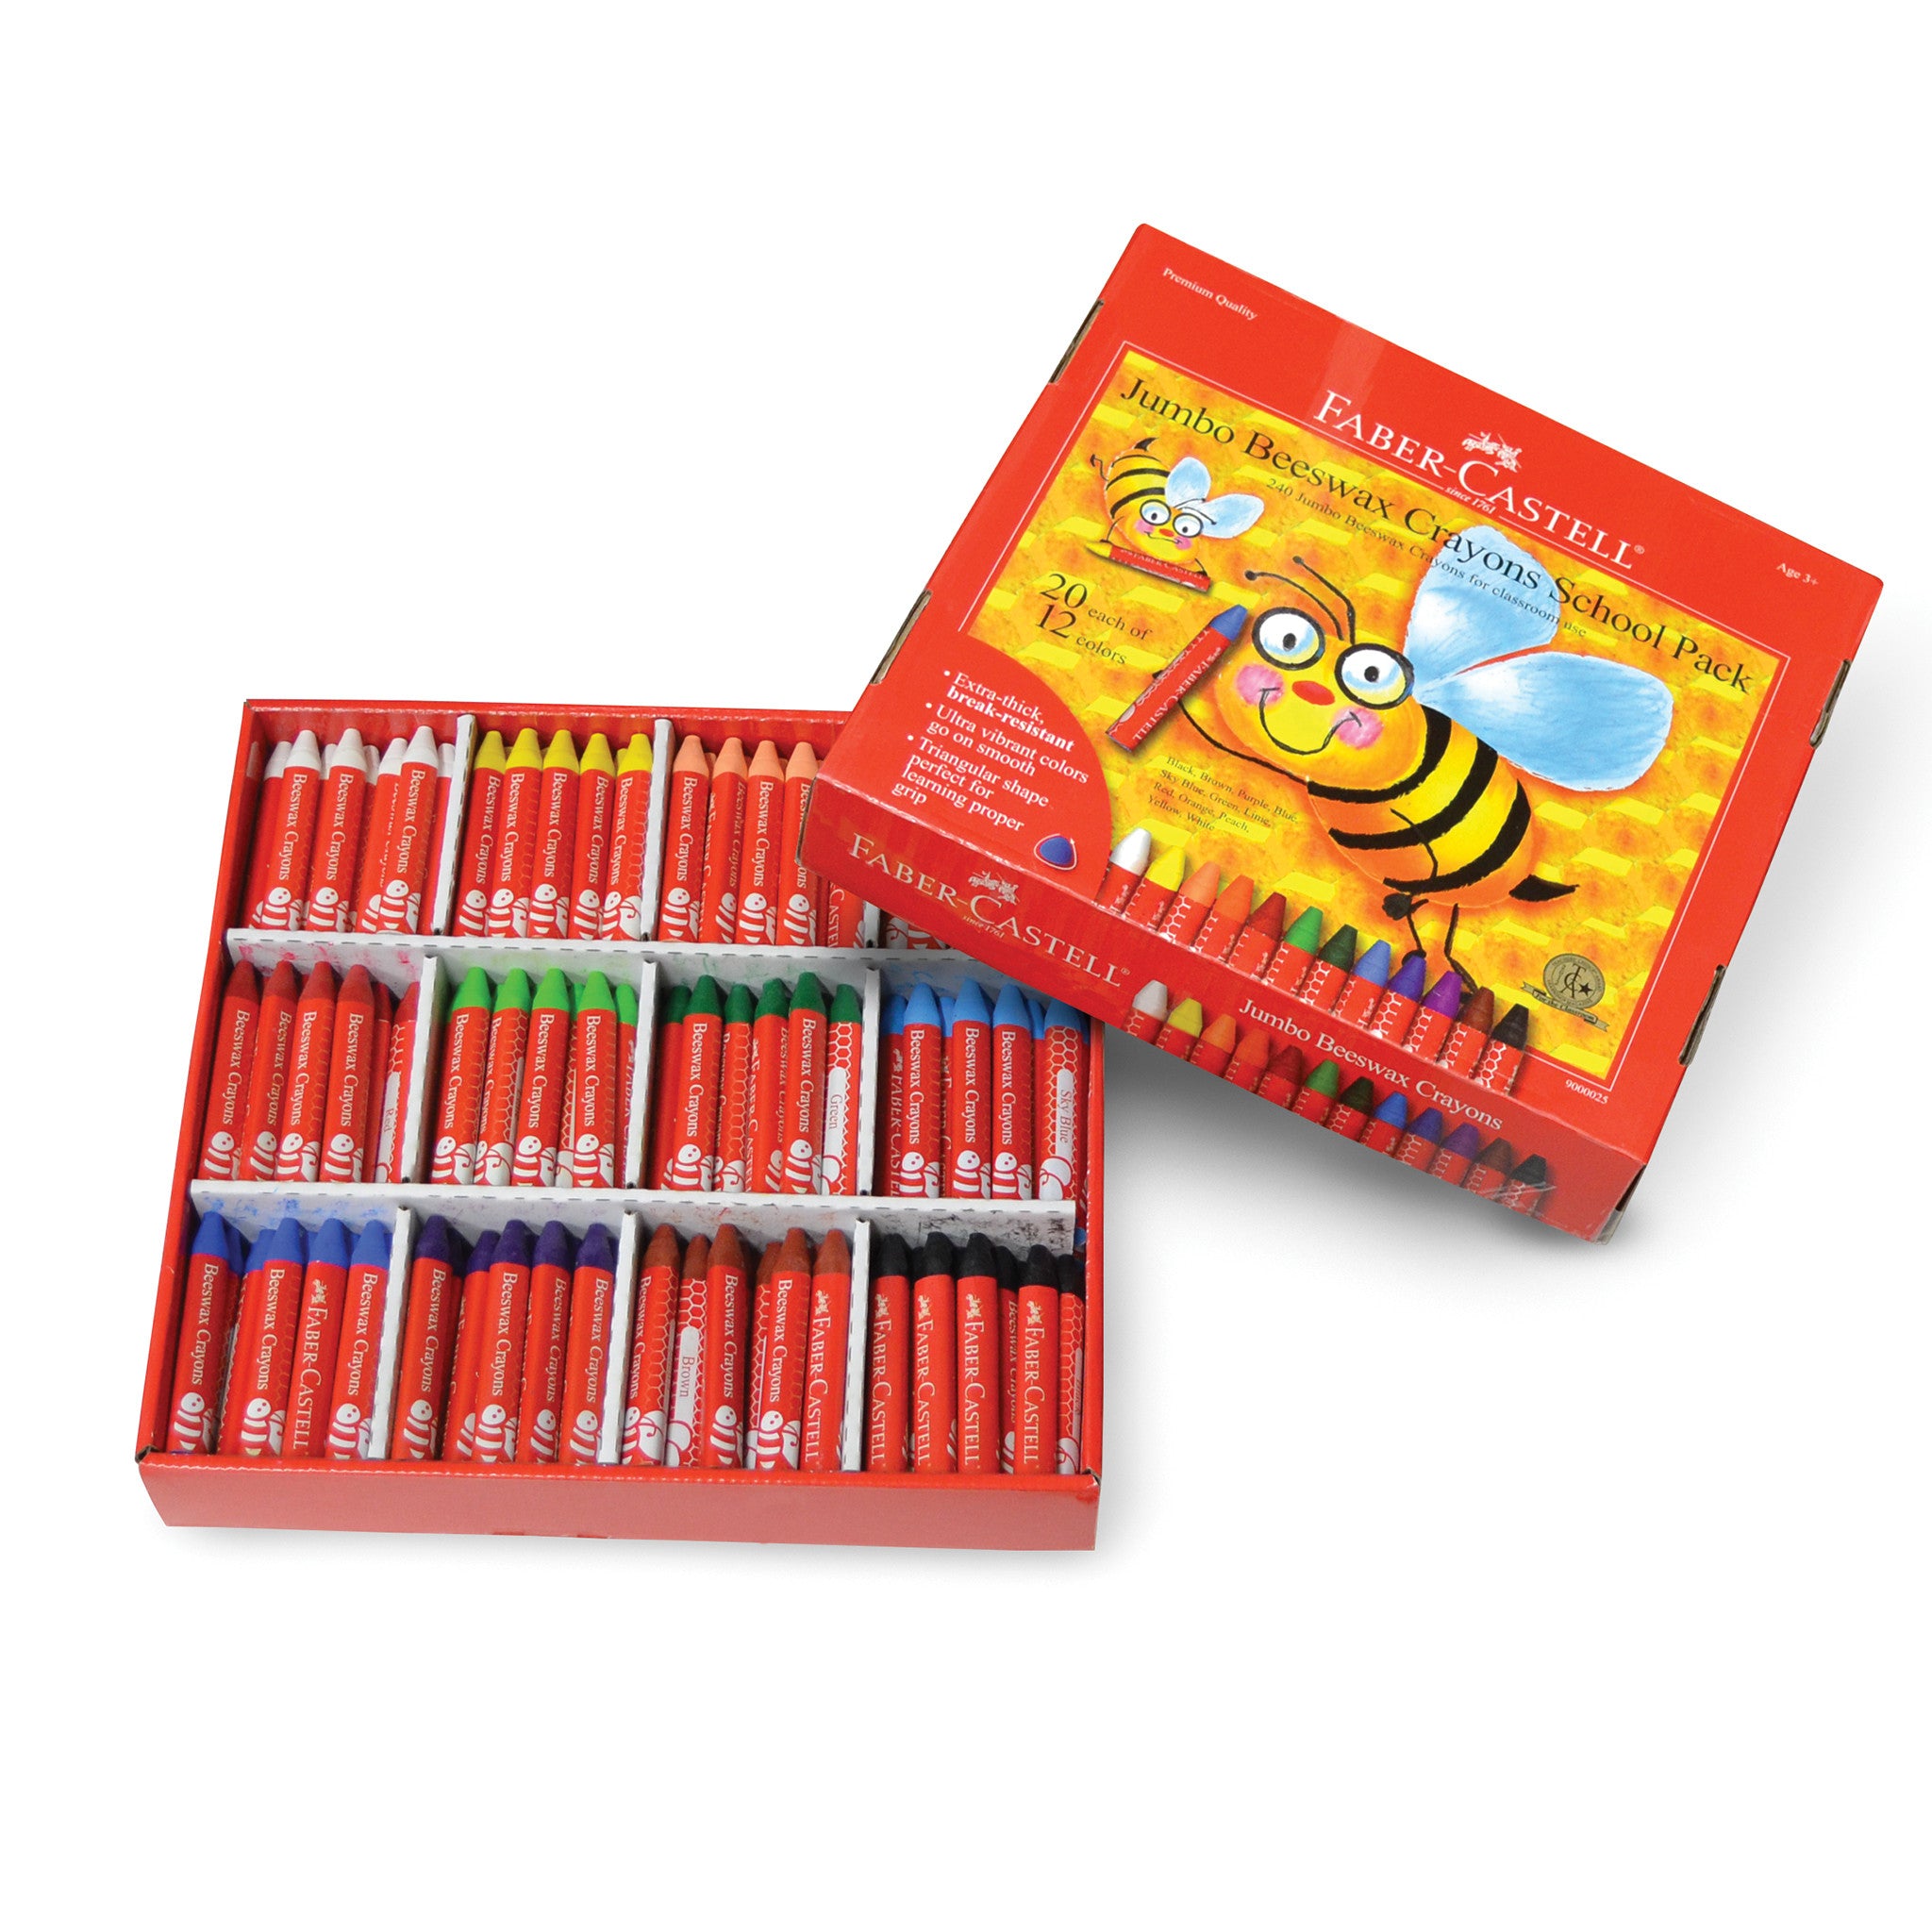 Faber-Castell Jumbo Beeswax Crayons - School Pack of 240